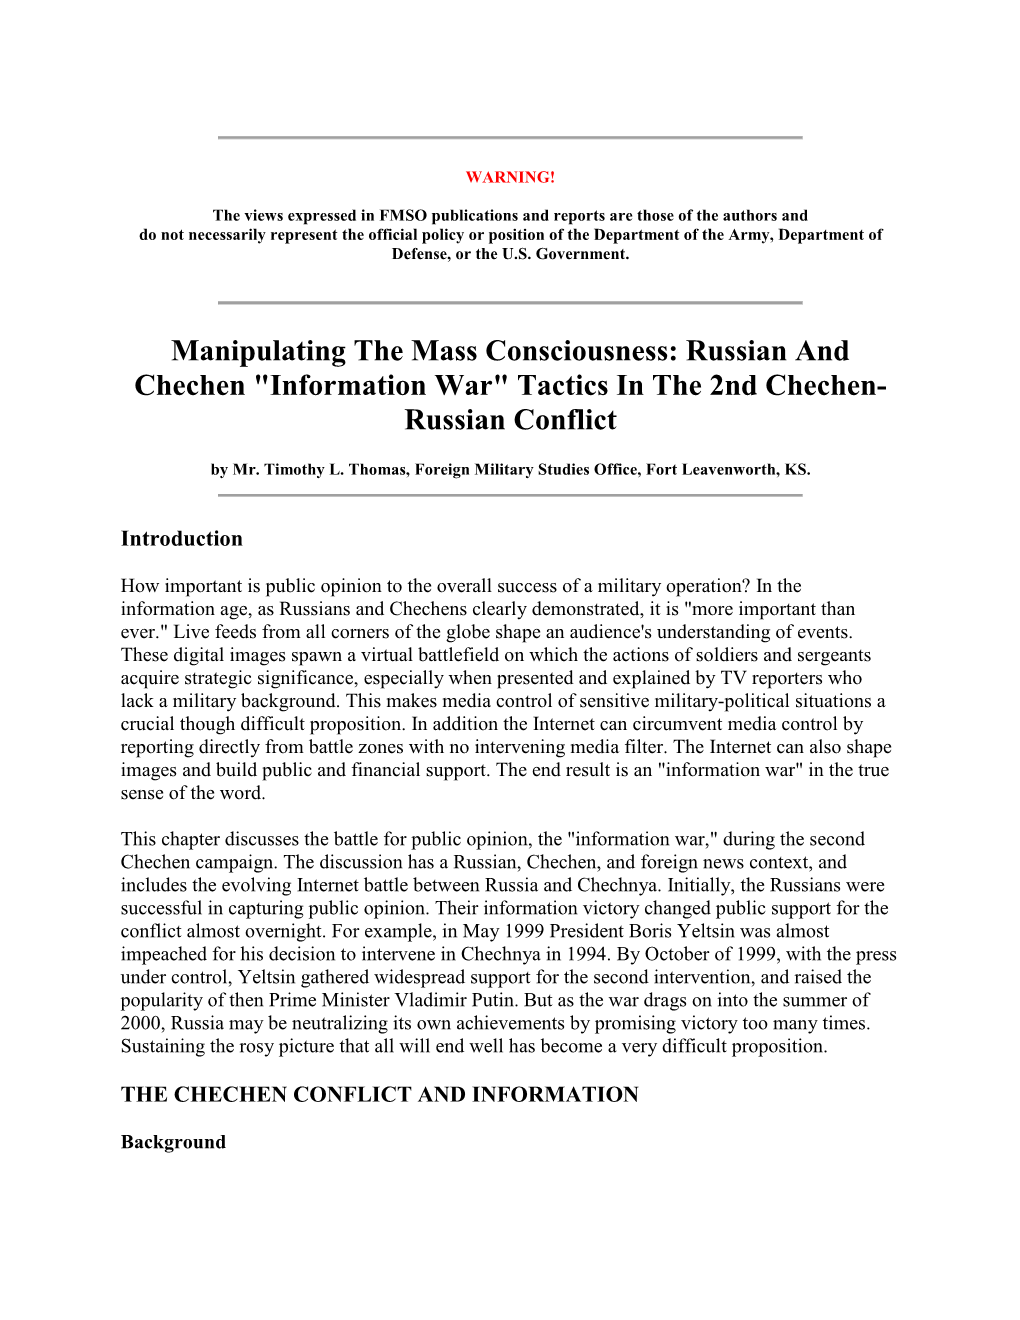 Manipulating the Mass Consciousness: Russian and Chechen "Information War" Tactics in the 2Nd Chechen- Russian Conflict